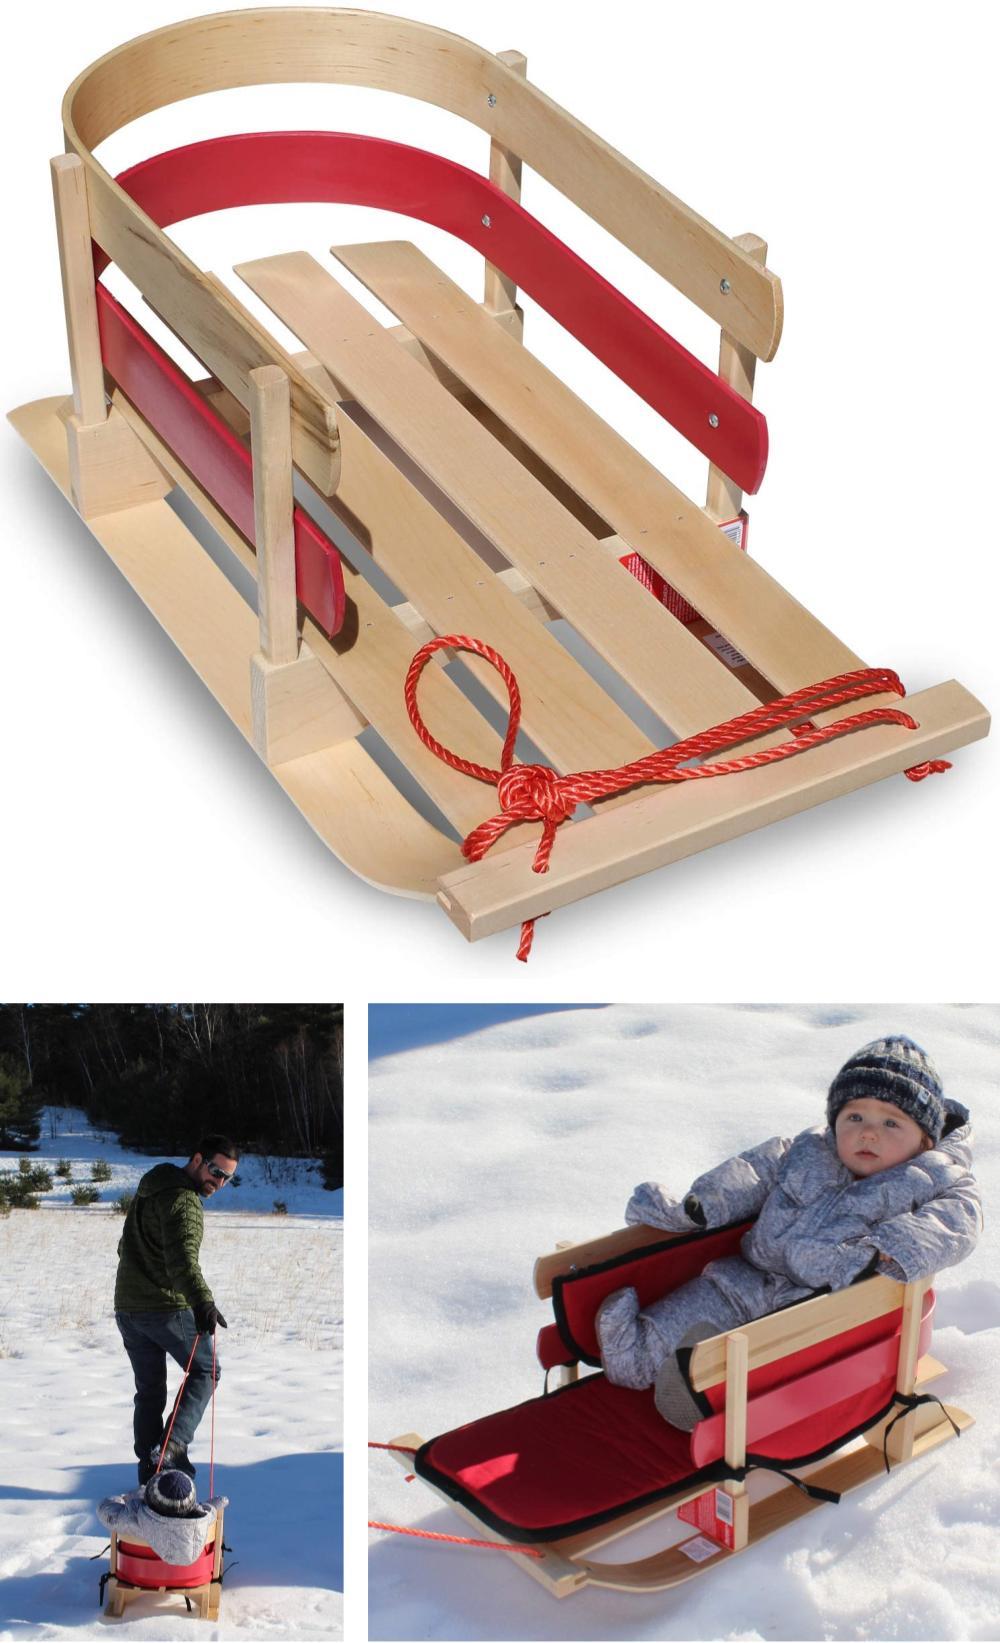 Flexible Flyer Best Wooden Sled For Toddlers And Baby 